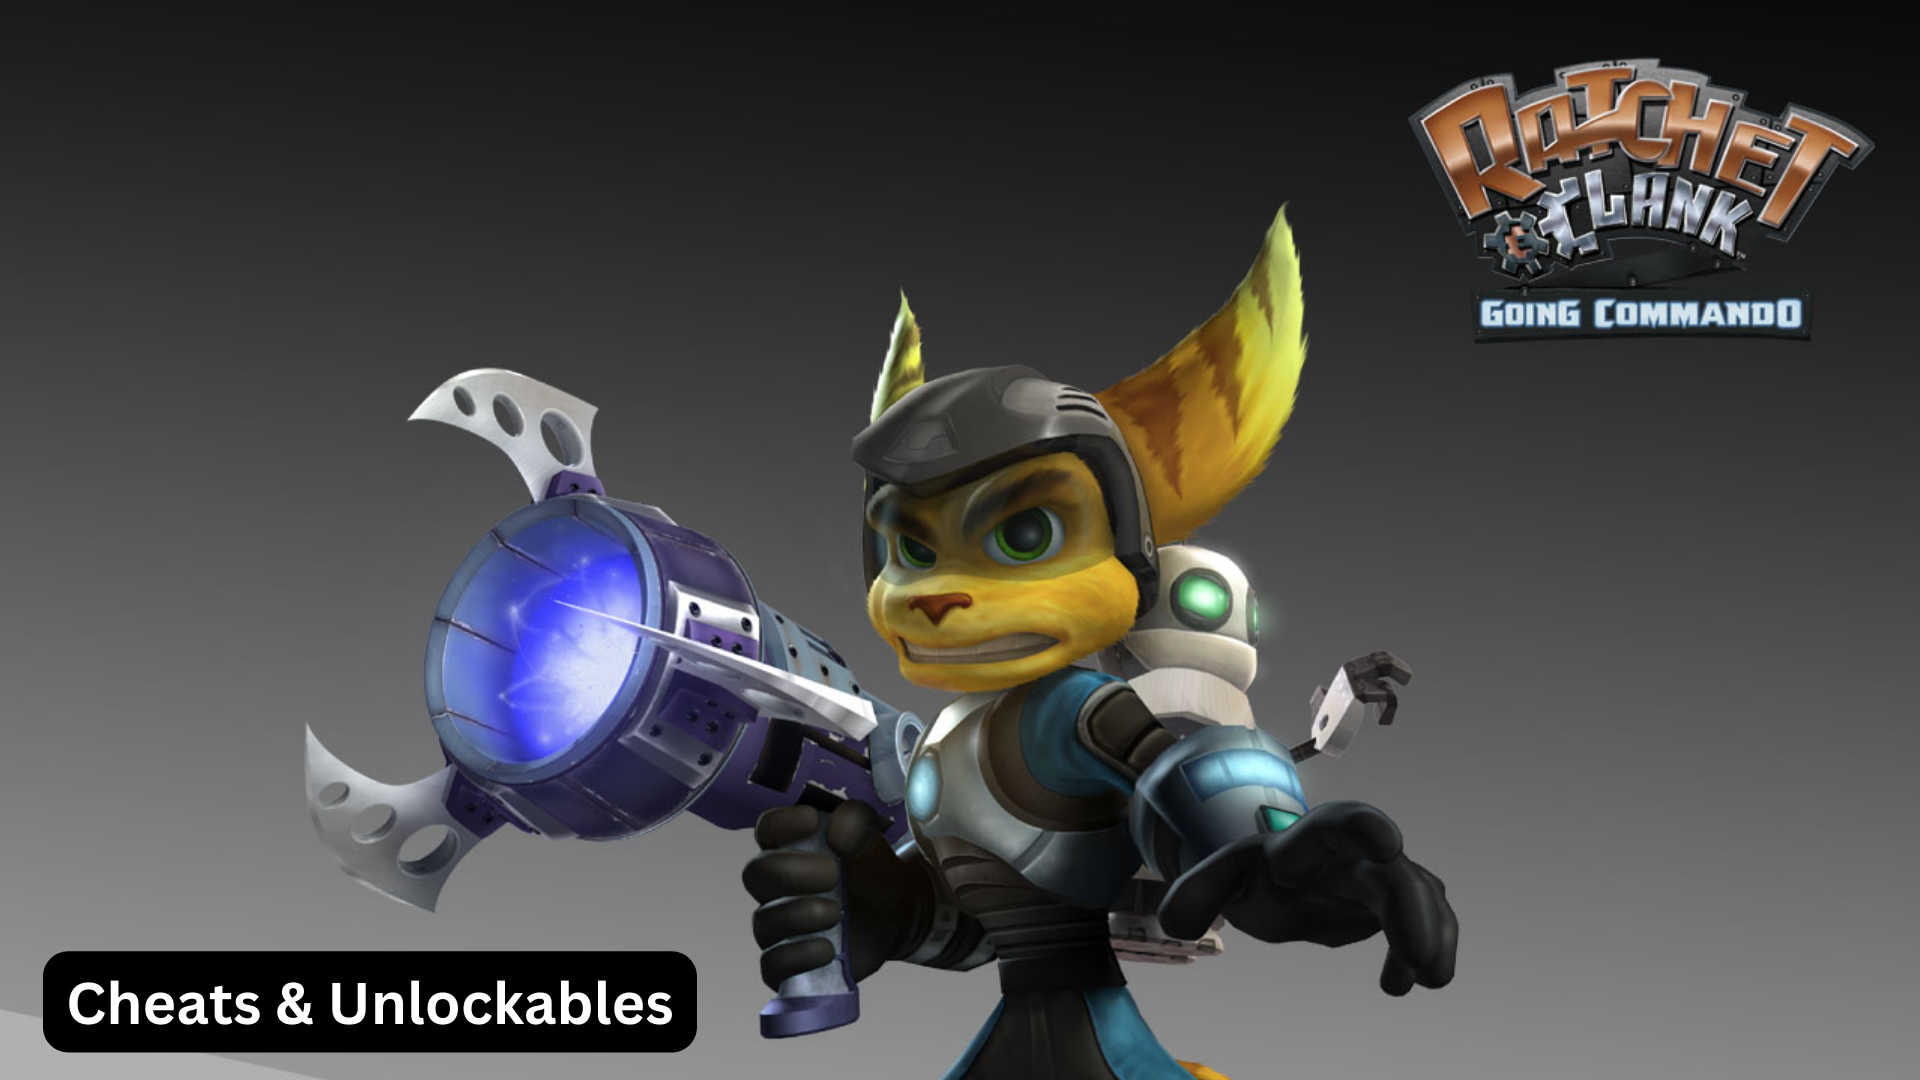 ratchet and clank: going commando cheats and unlockables